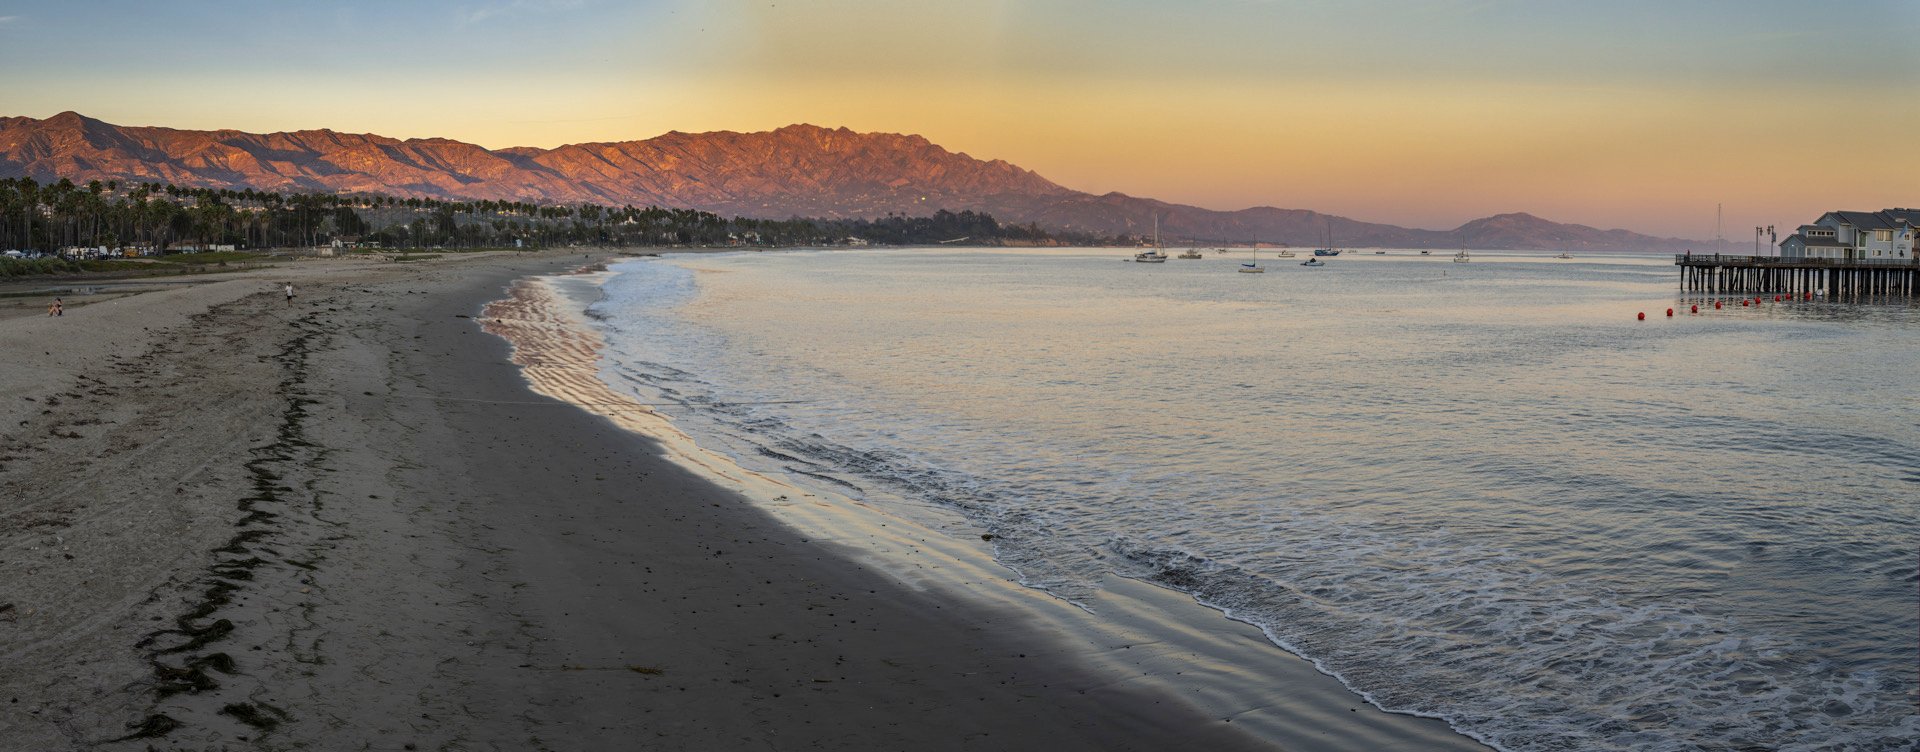 This is Santa Barbara east beach or Pirate bay as we locals like to call it.